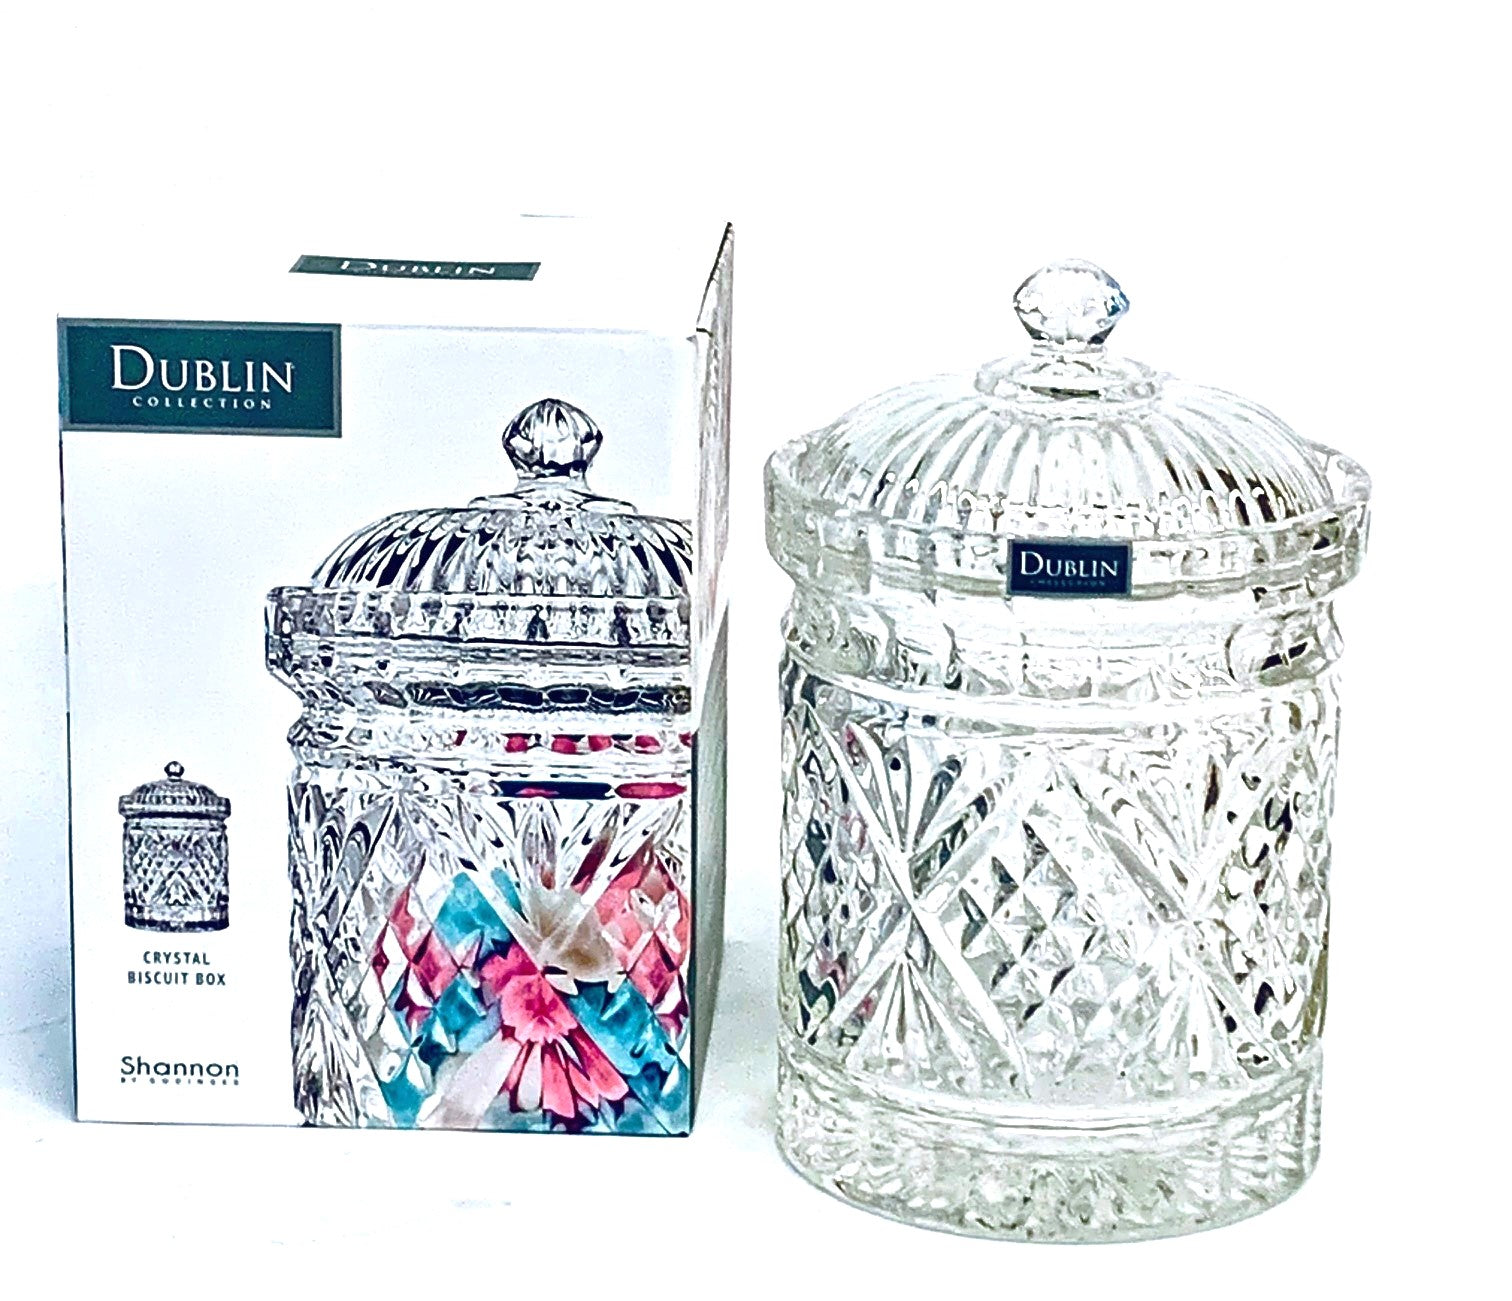 Biscuit box crystal Dublin collection - Royal Gift